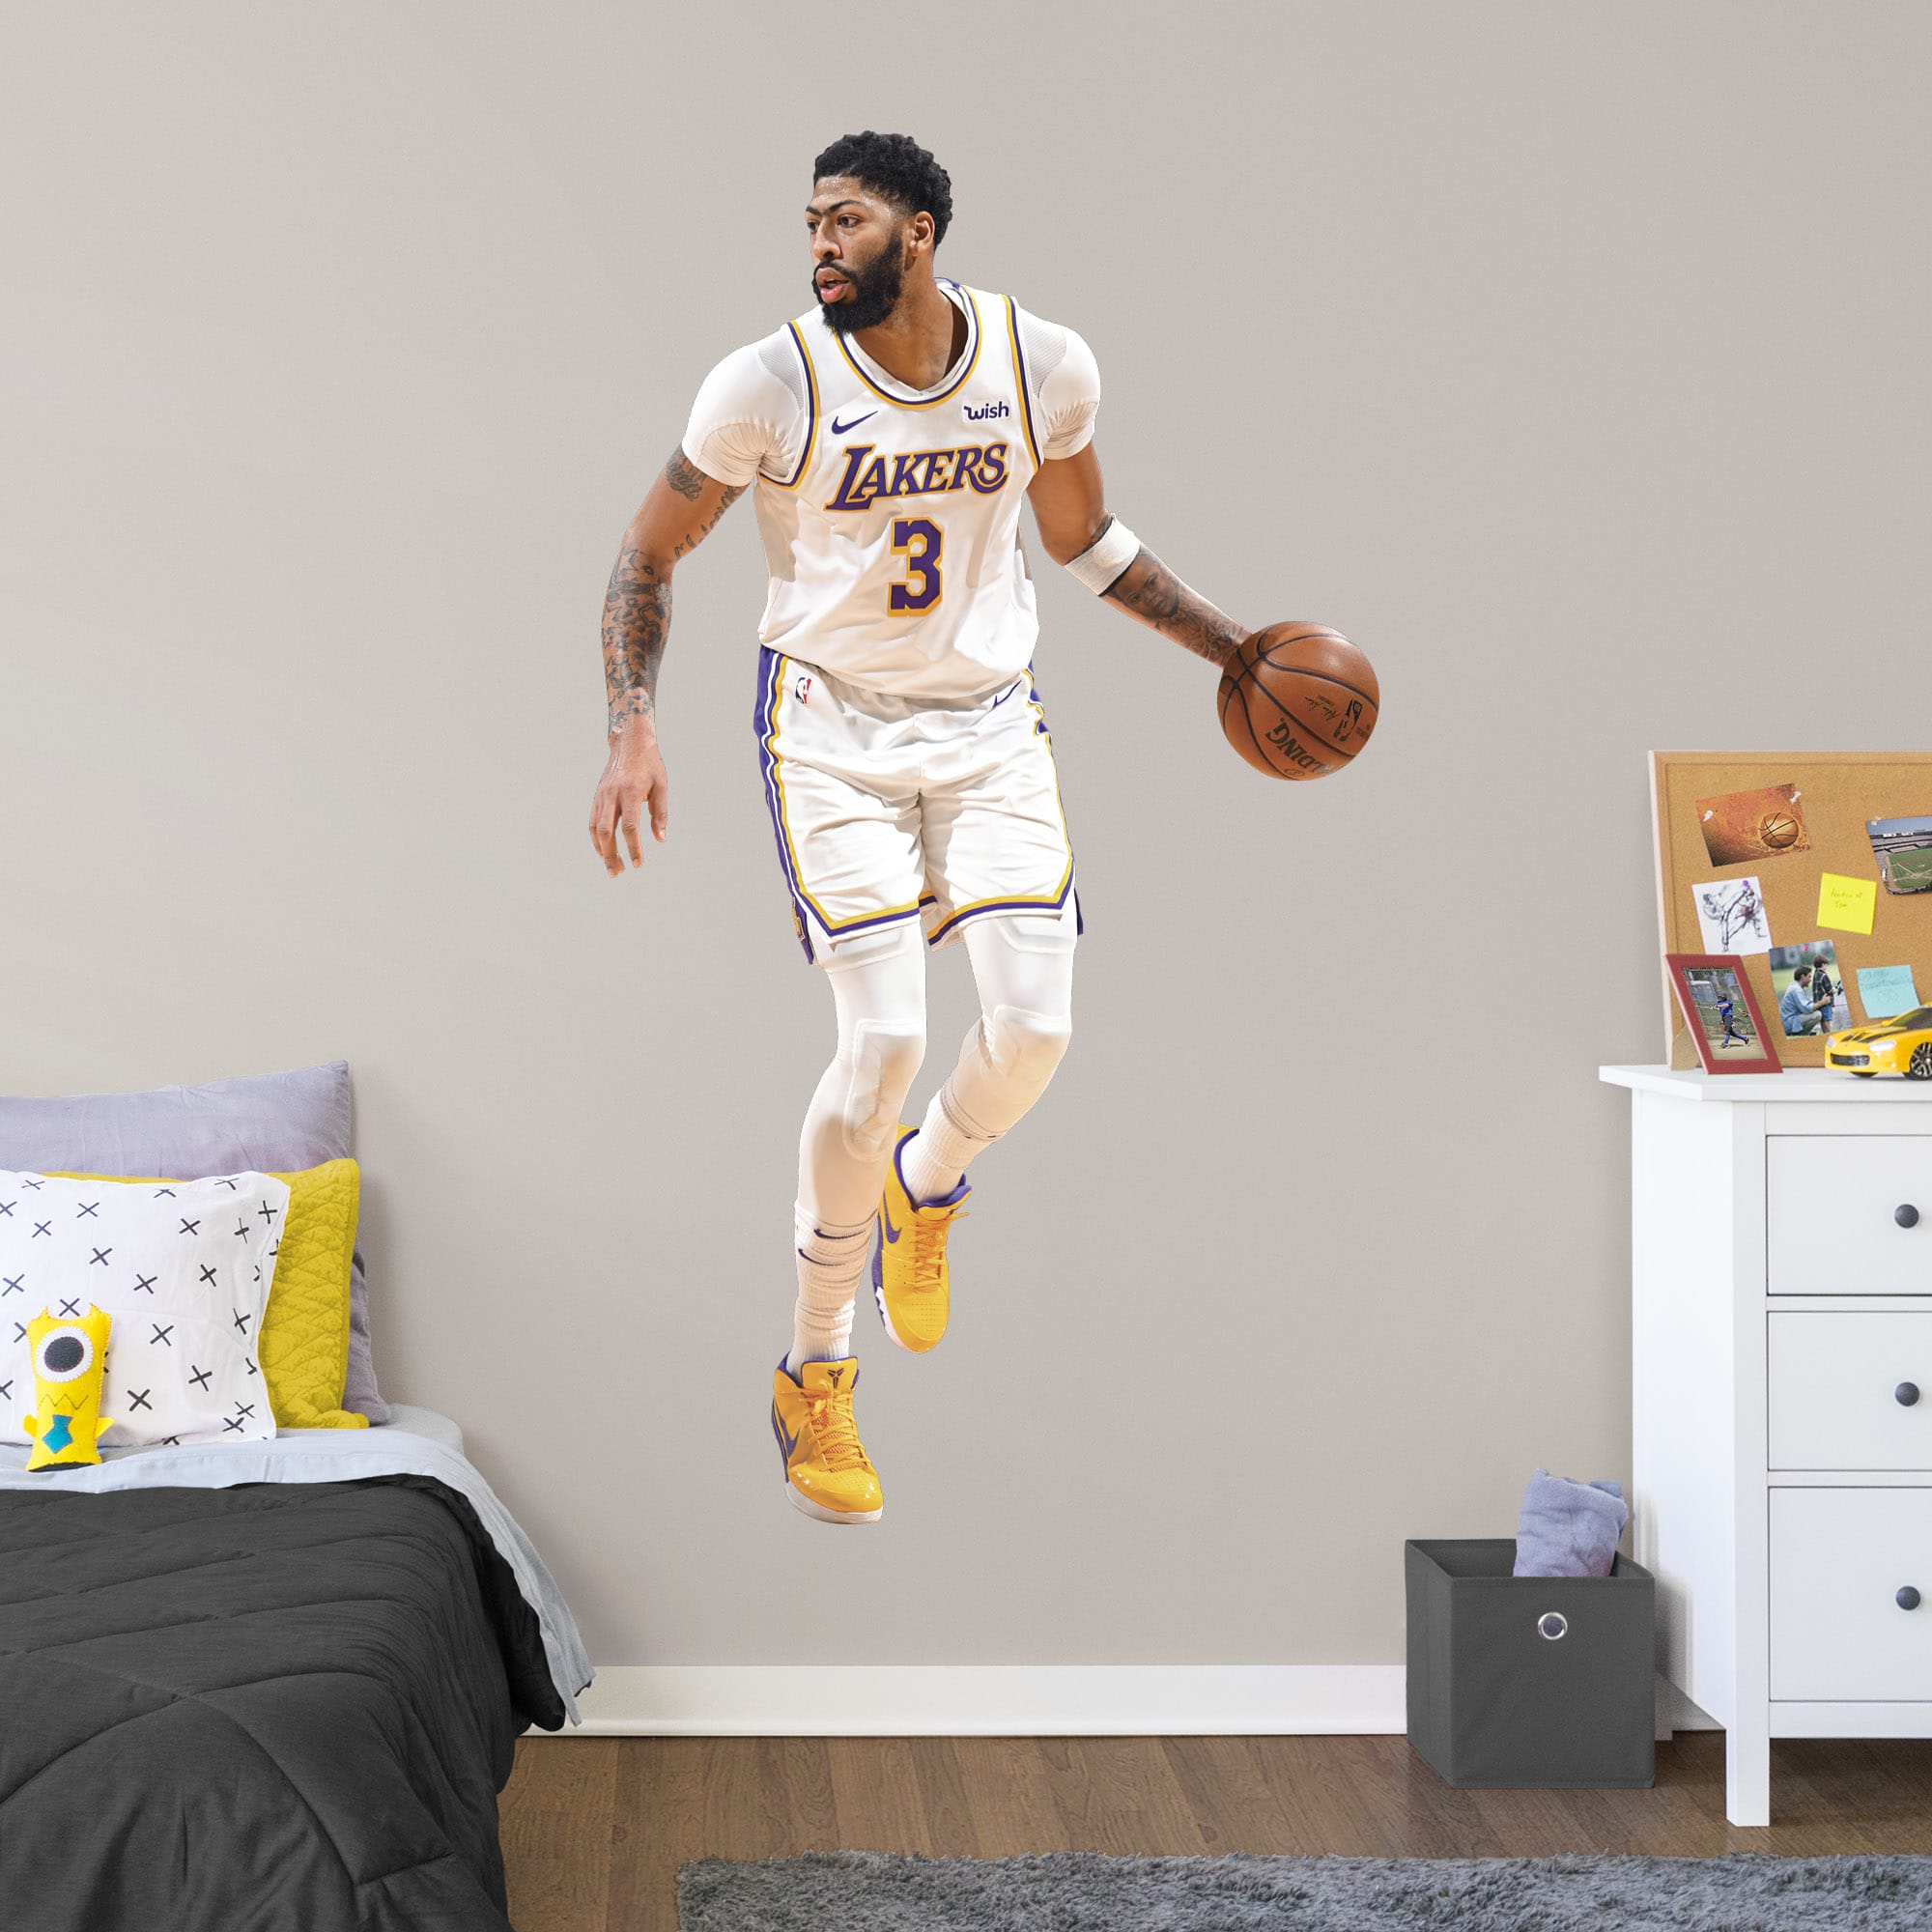 Anthony Davis for Los Angeles Lakers - Officially Licensed NBA Removable Wall Decal Life-Size Athlete + 2 Decals (47"W x 83"H) b